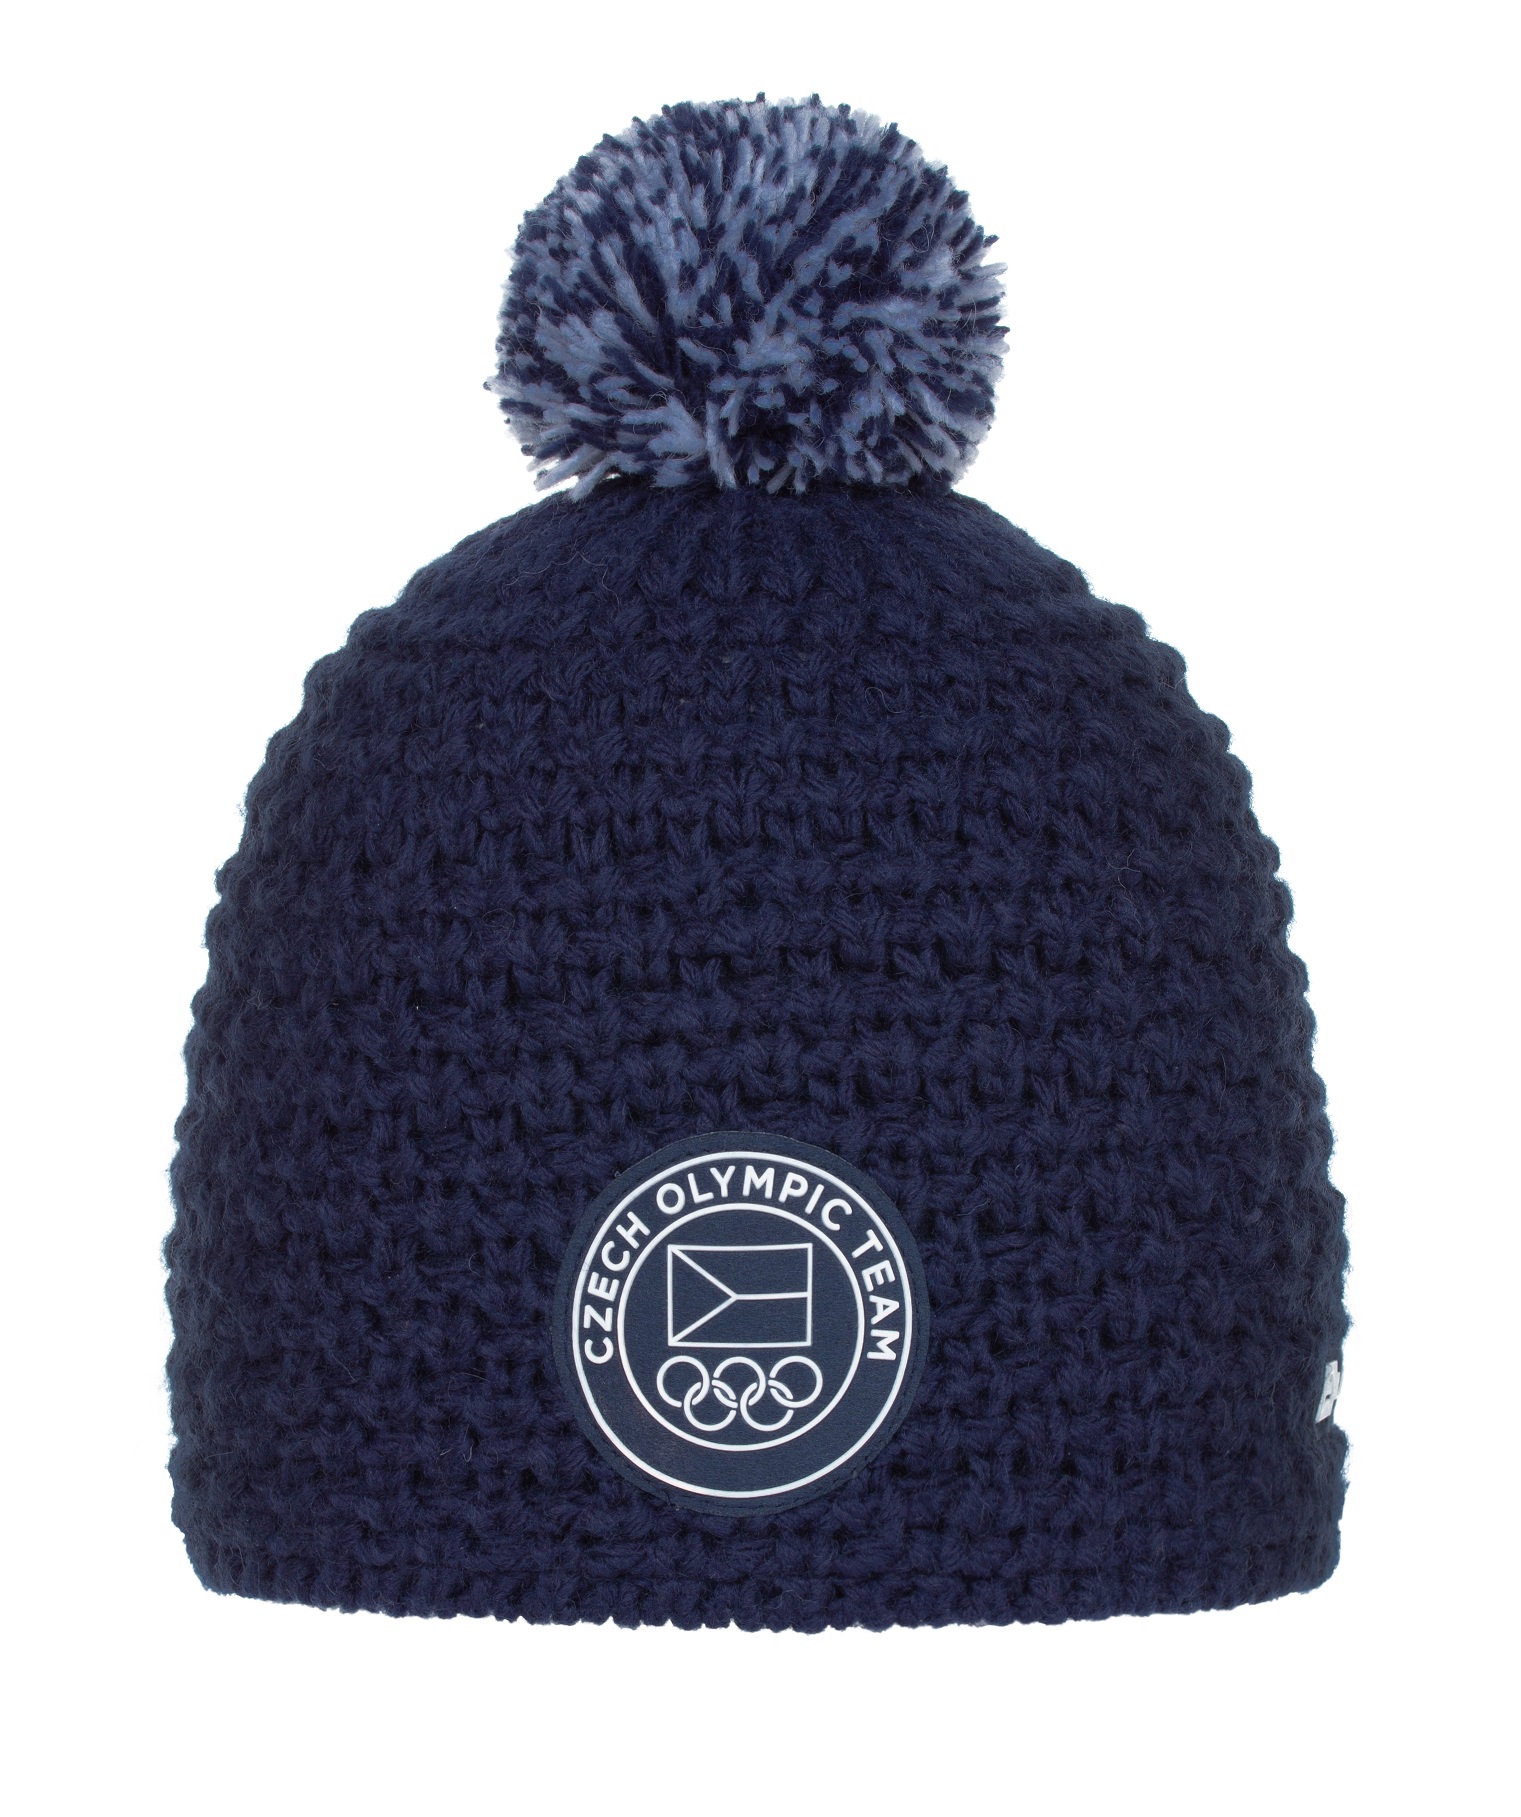 Winter beanie from the Olympic collection ALPINE PRO KEI MOOD INDIGO VARIANT M